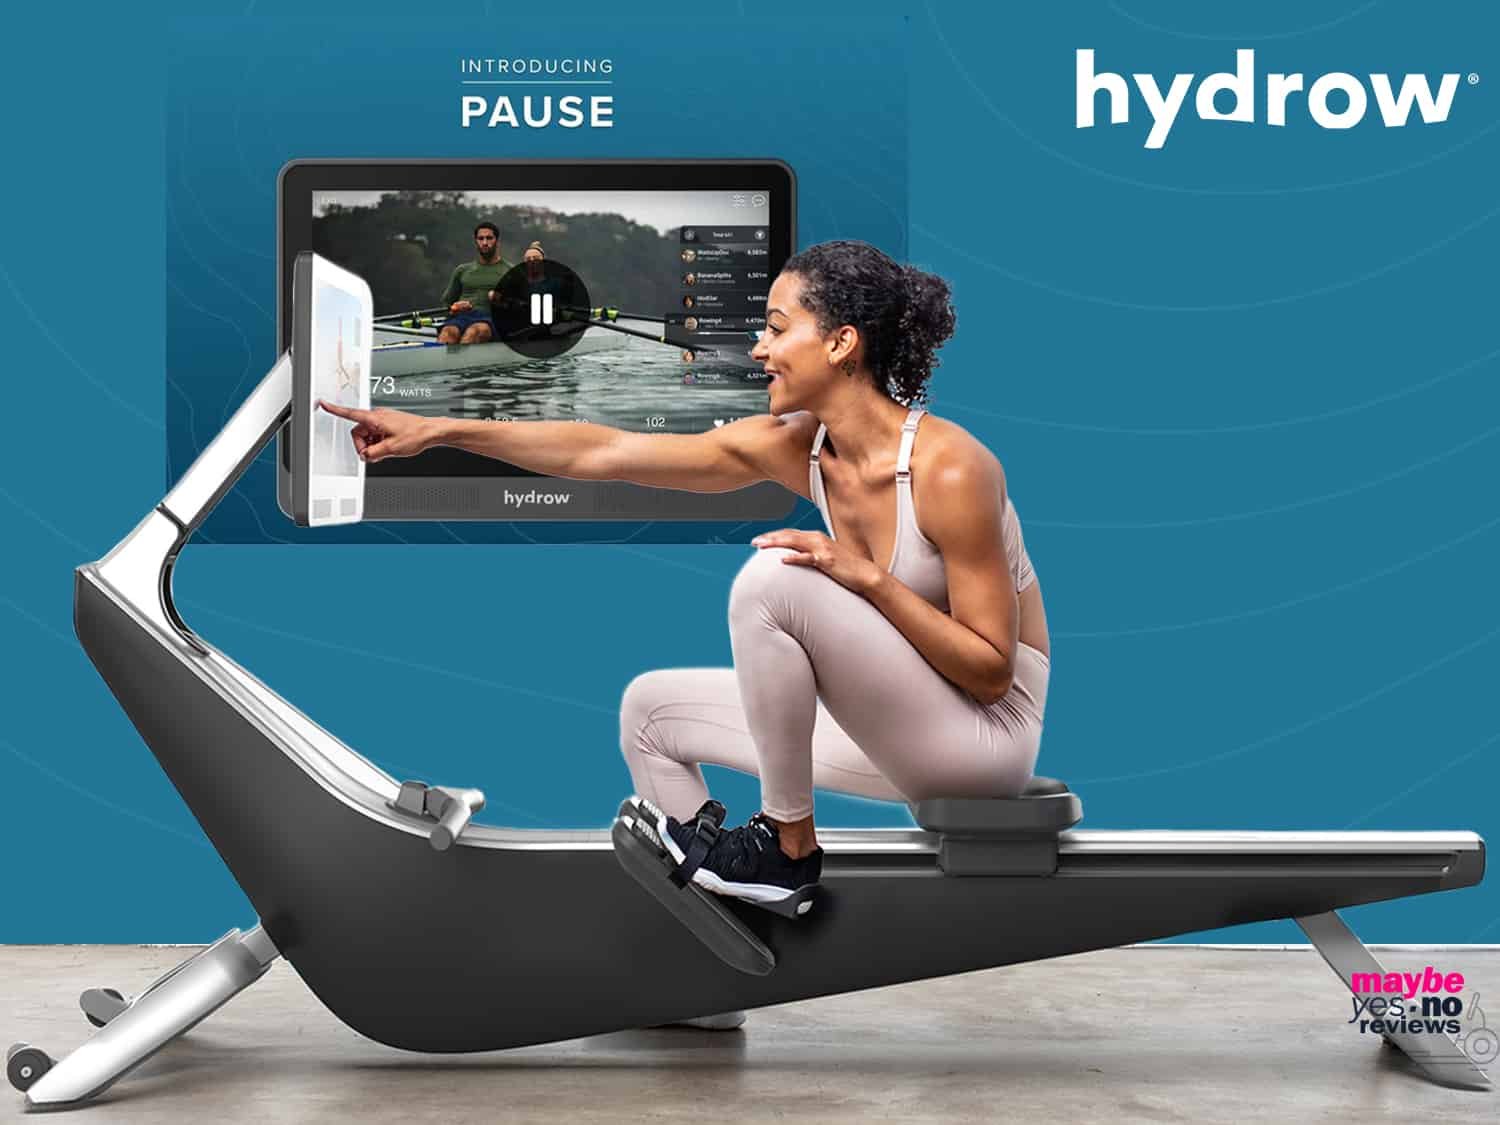 Hydrow Rower Adds a Pause Button to its Rowing App — MAYBE.YES.NO Best Reviews